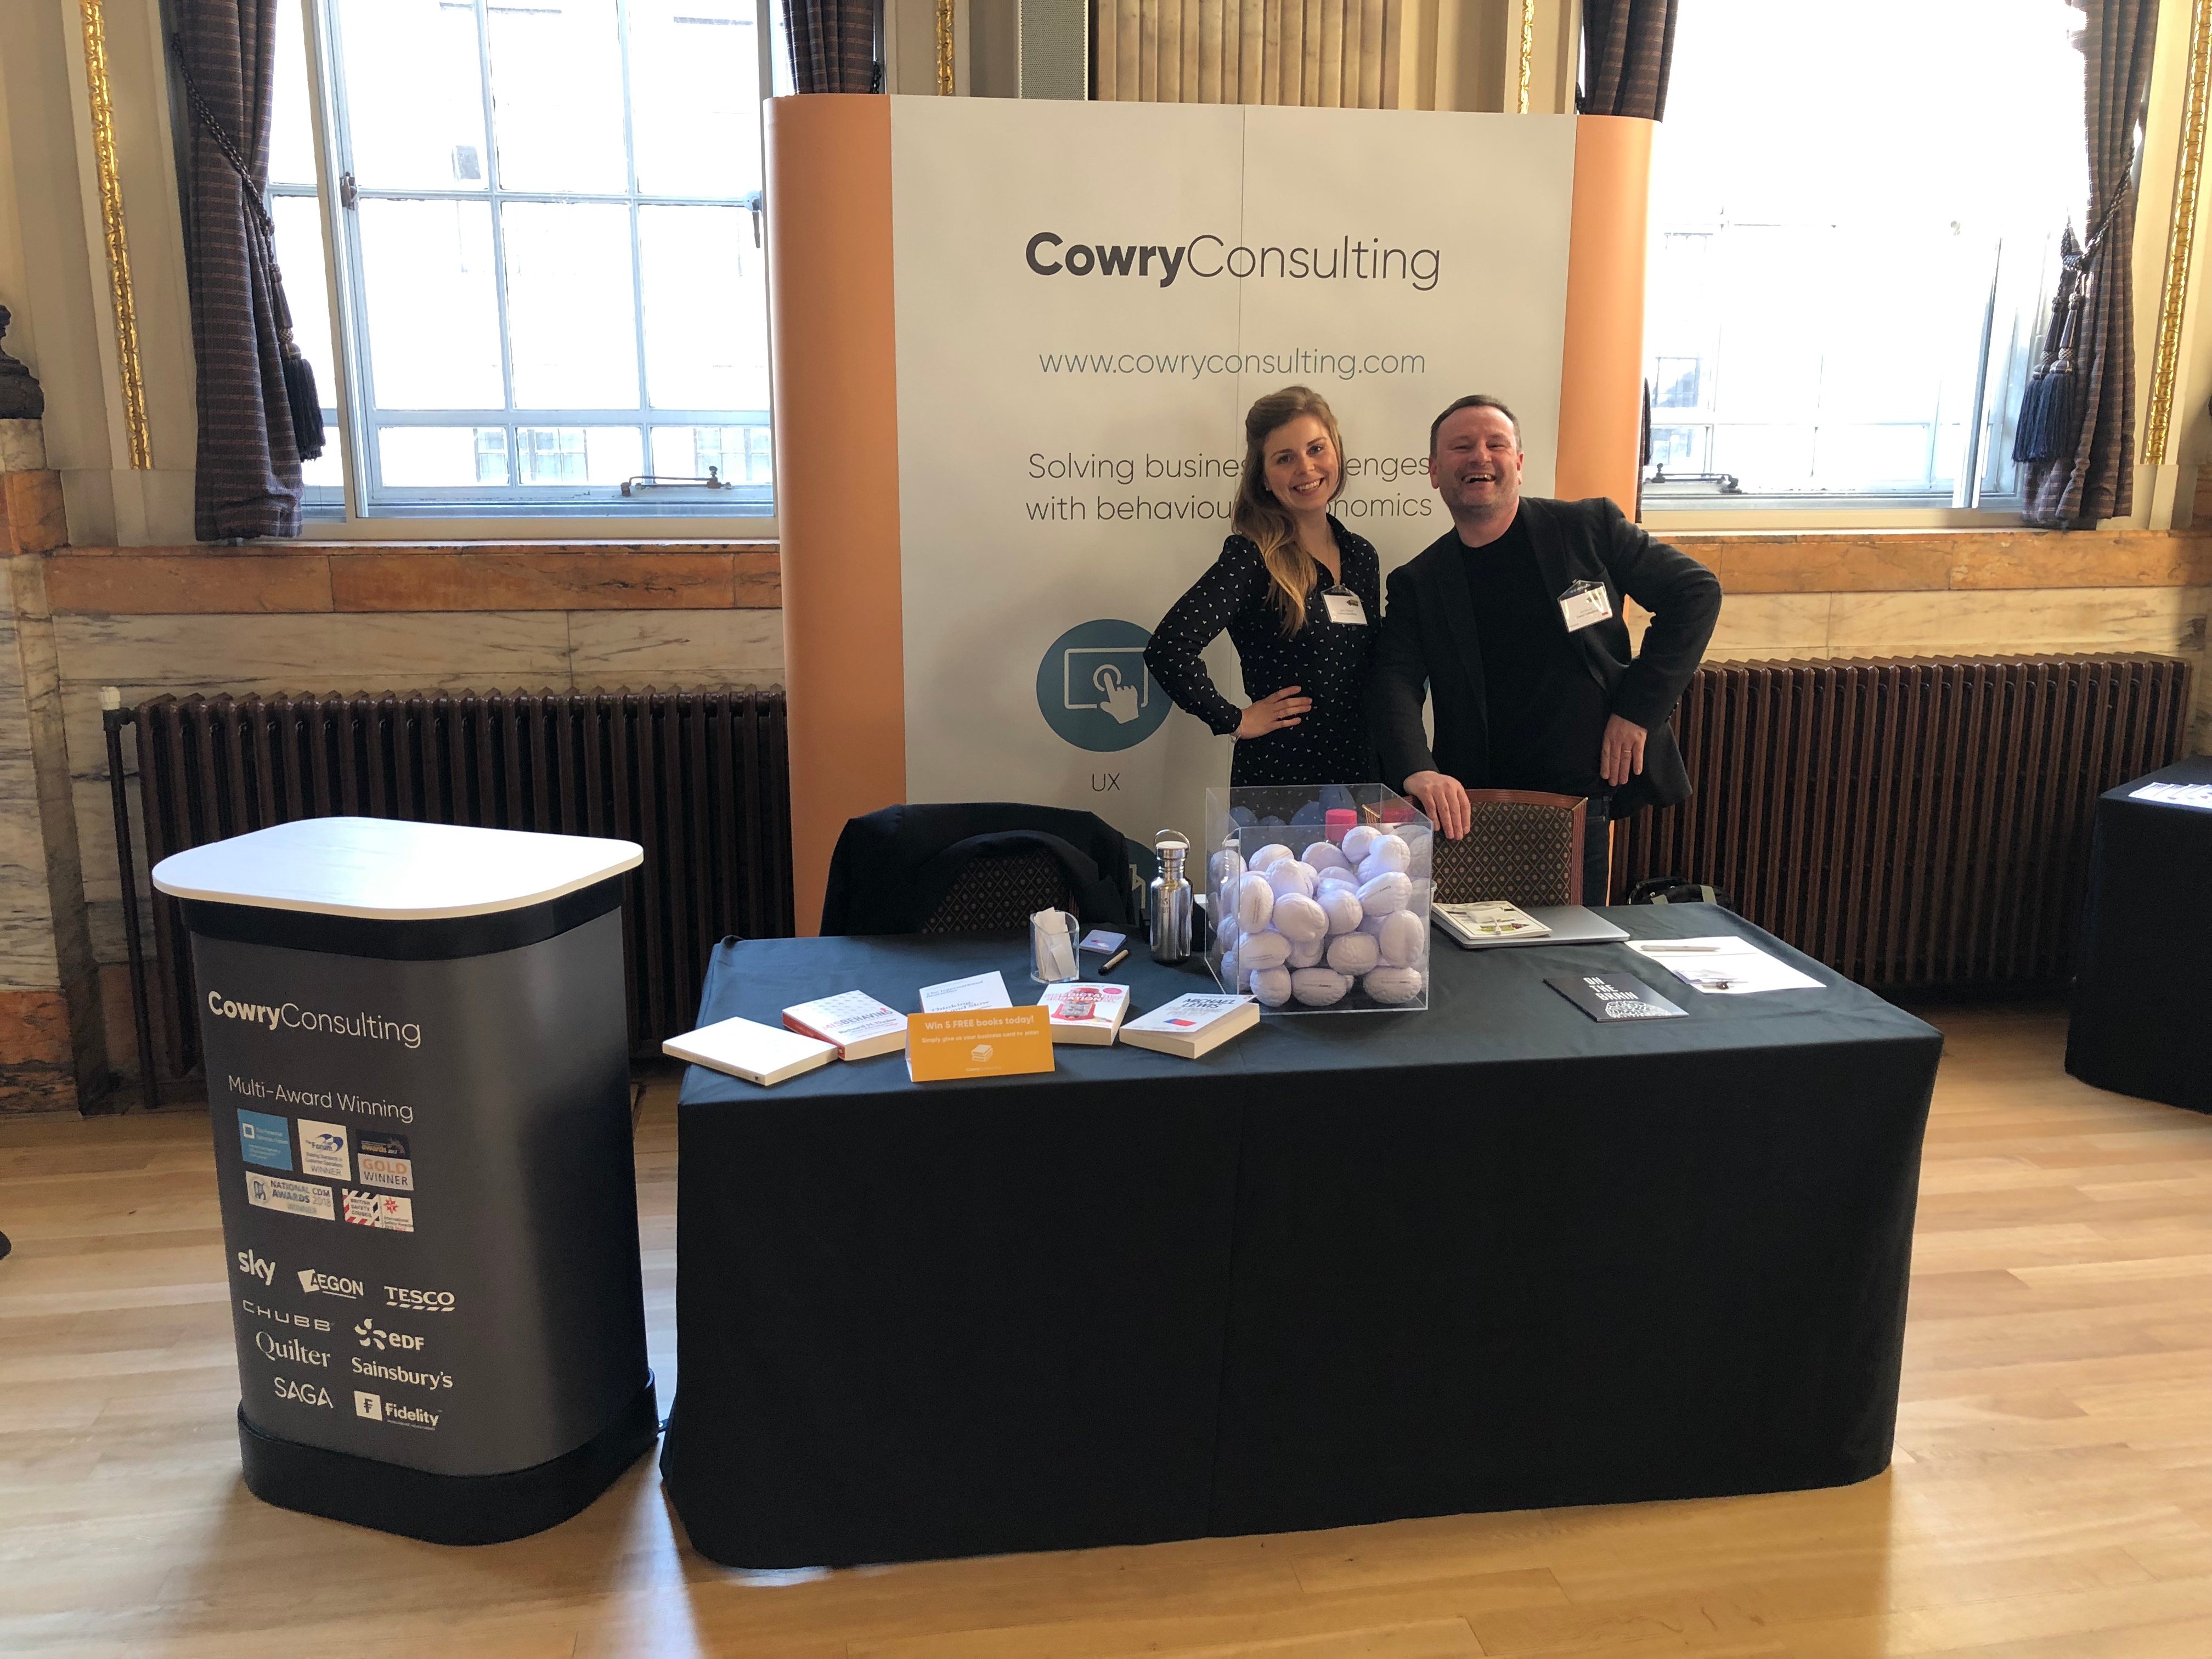 Cowry Consulting behavioural science customer experience conference